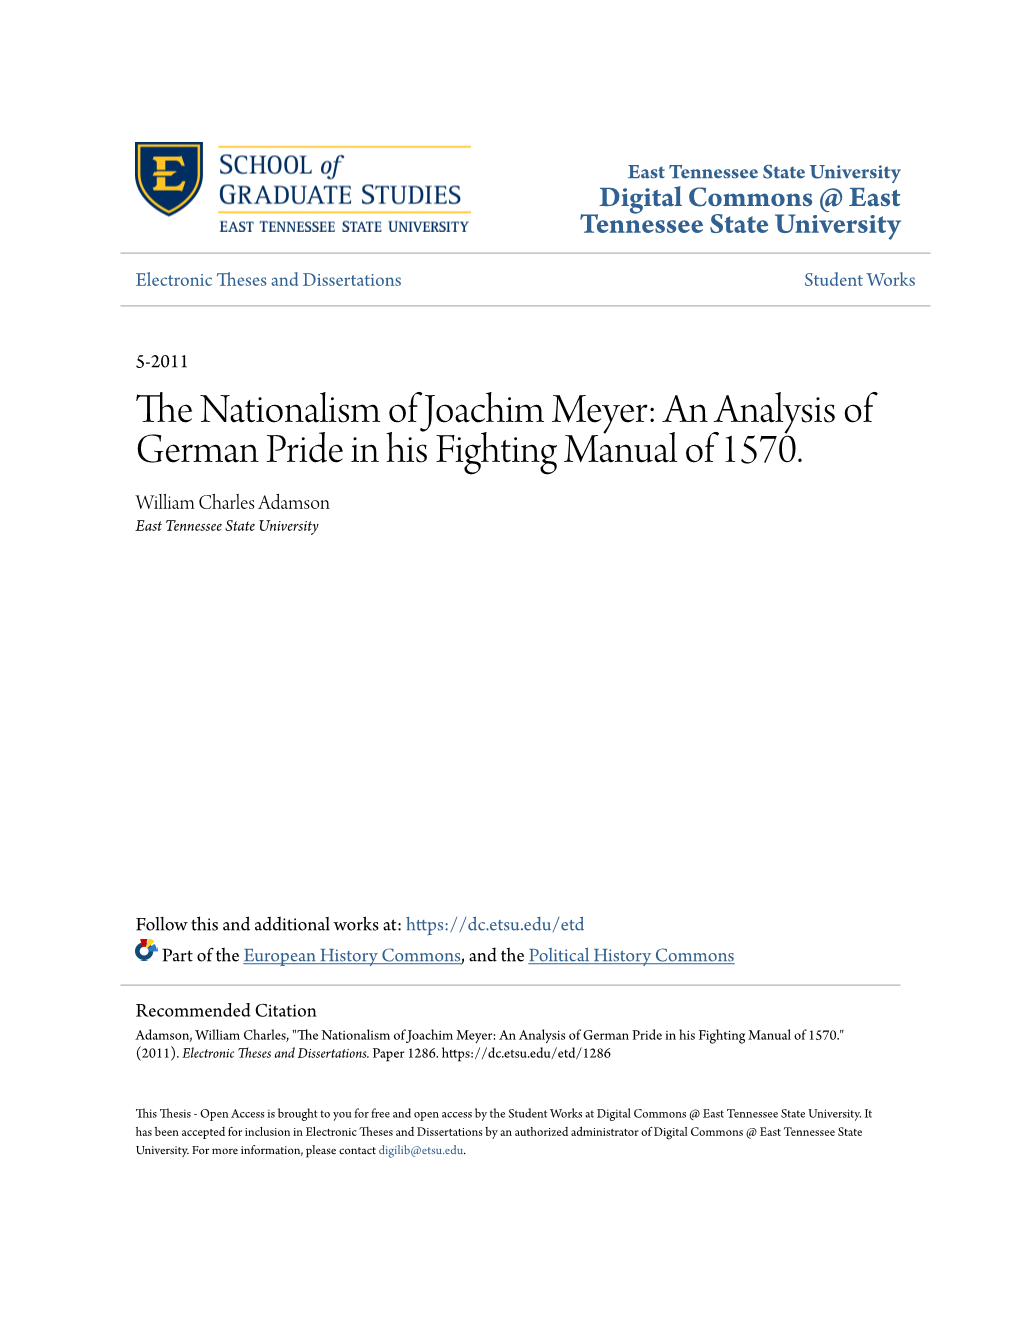 The Nationalism of Joachim Meyer: an Analysis of German Pride in His Fighting Manual of 1570 ______